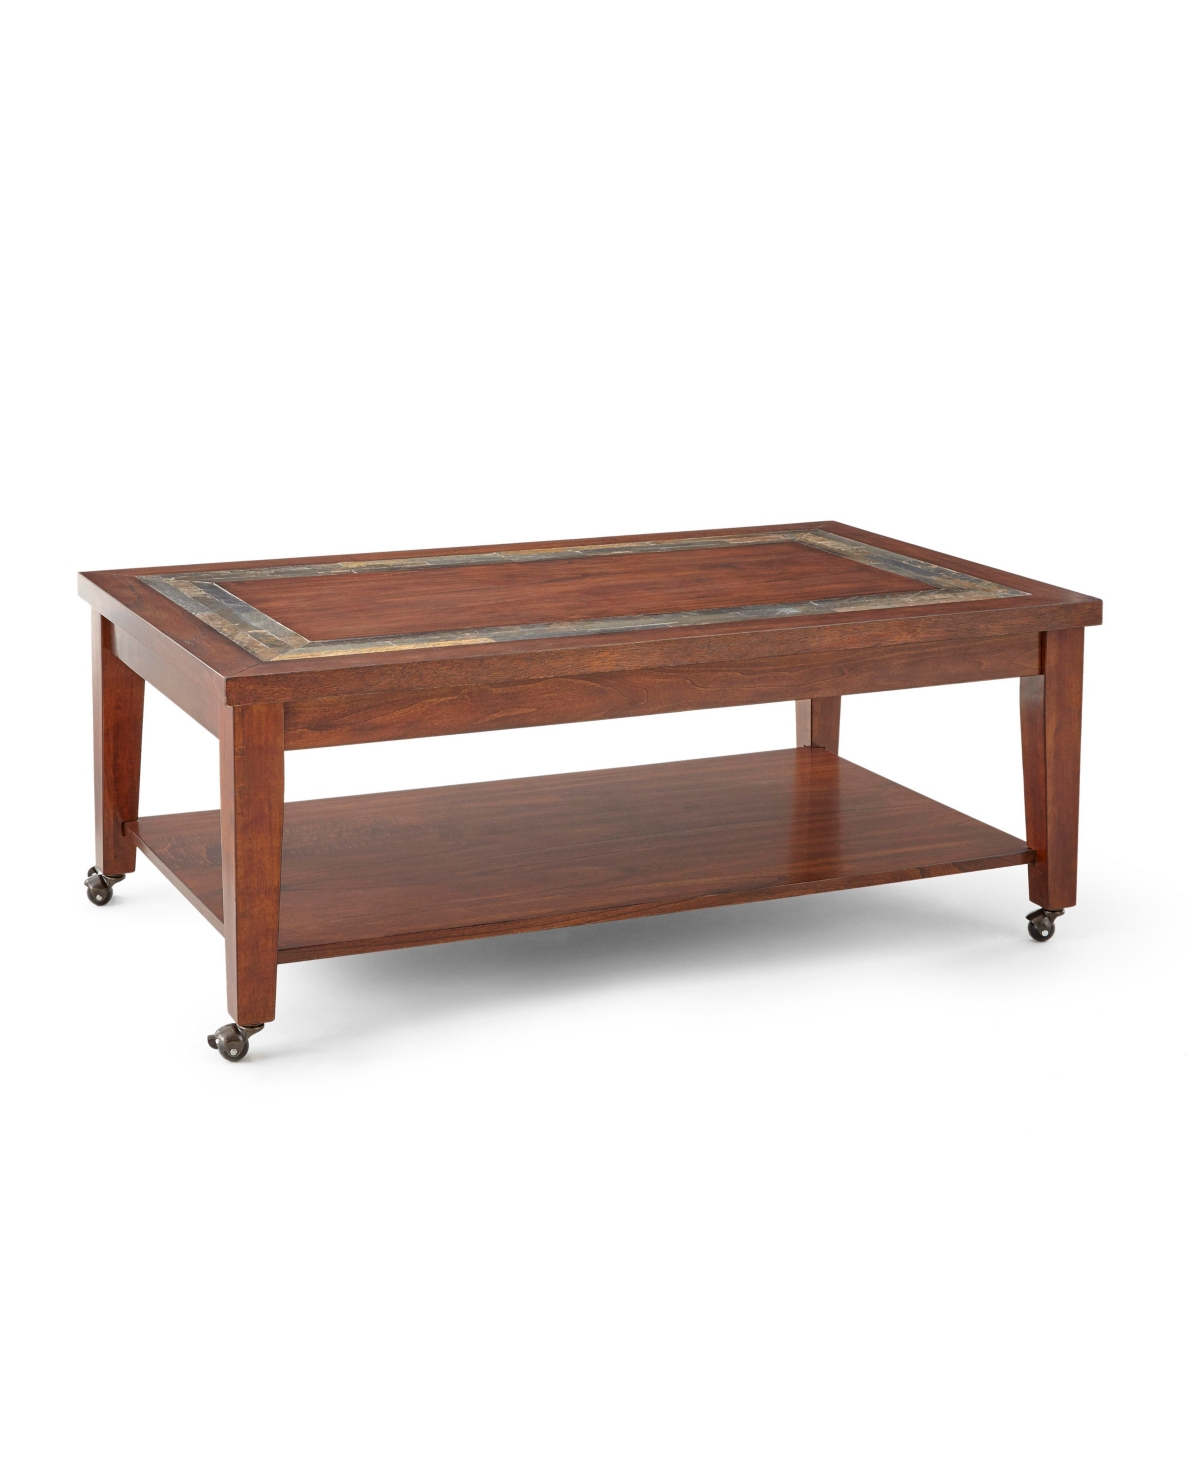 Steve Silver Davenport 50" Wood Cocktail Table With Locking Casters In Medium Brown Cherry Finish With Burnishi